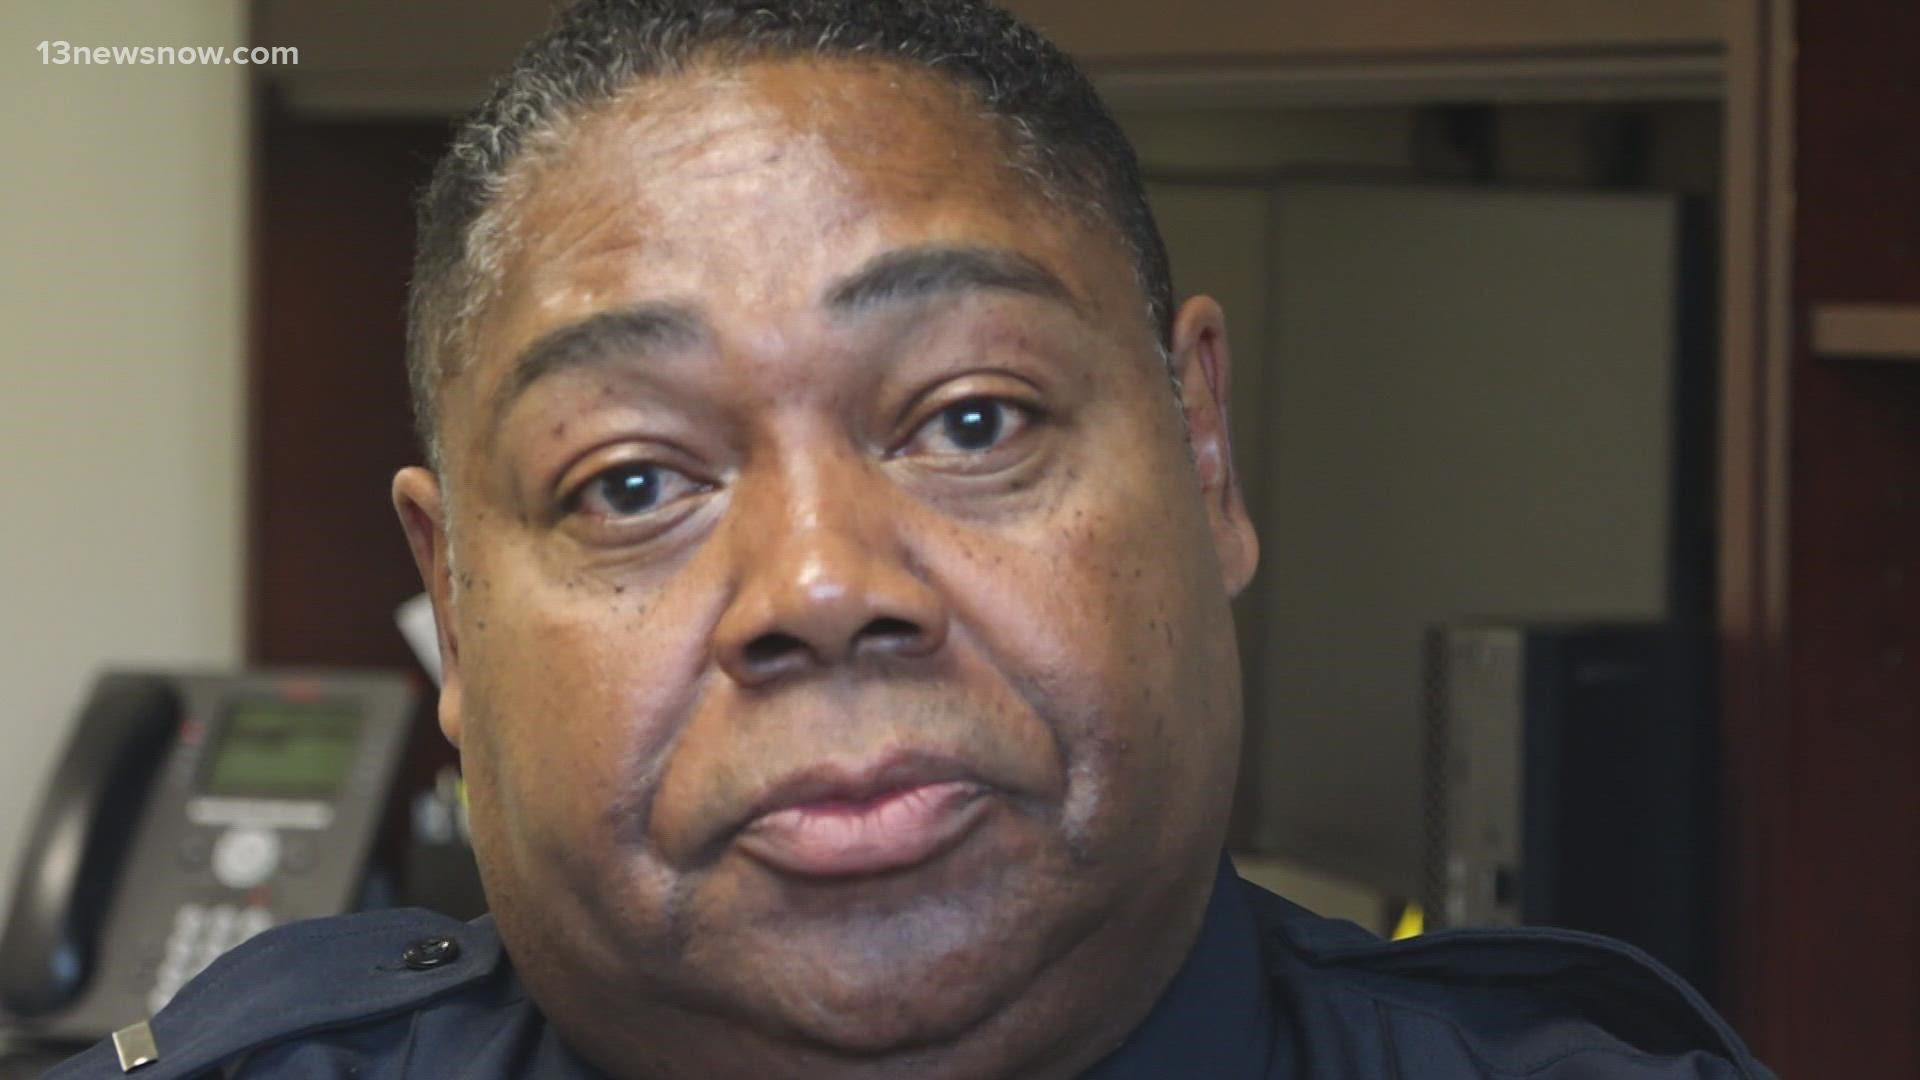 Chief Renado Prince said the city of Portsmouth needs to stand up and say 'enough is enough.'